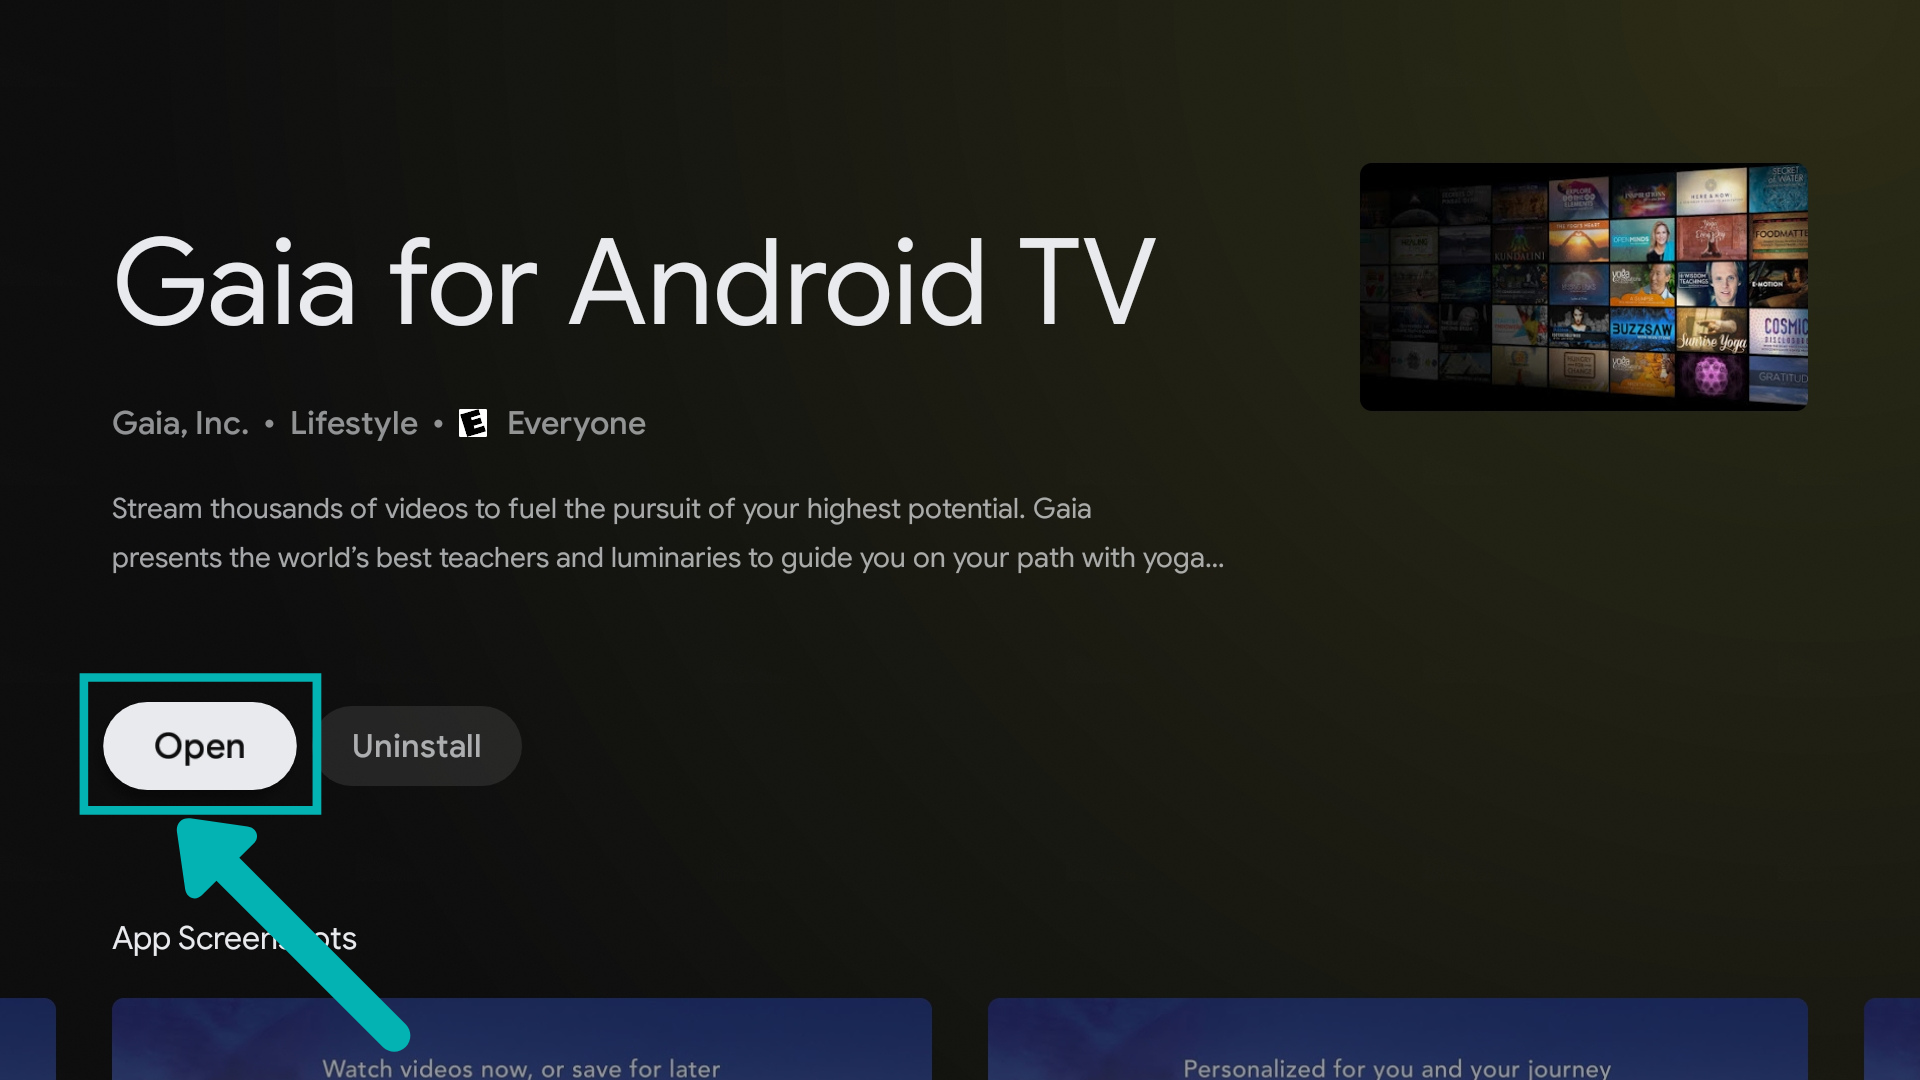 How do I install and log in to Gaia on my Android TV? – Gaia Help Center